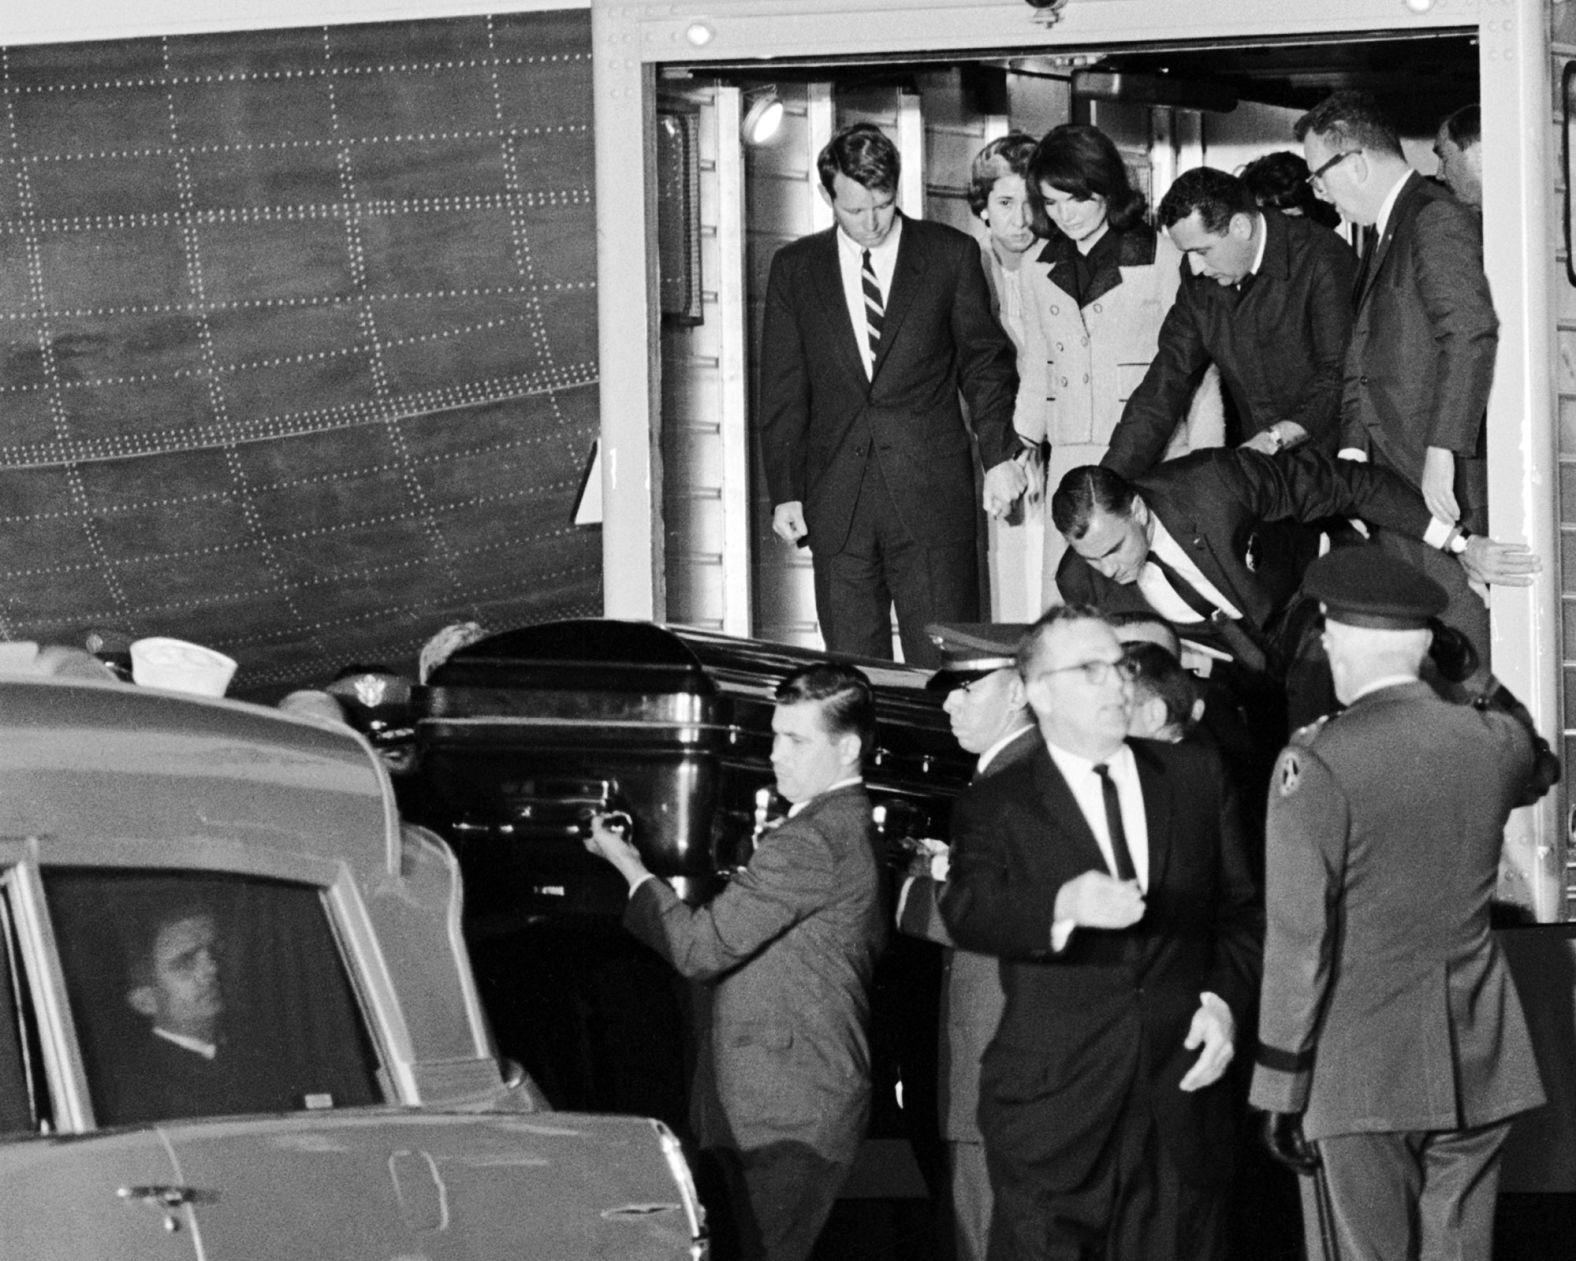 Kennedy's casket is moved from Air Force One to an ambulance upon arrival at Joint Base Andrews Air Force Base. Jacqueline Kennedy is holding hands with her brother-in-law Robert Kennedy.